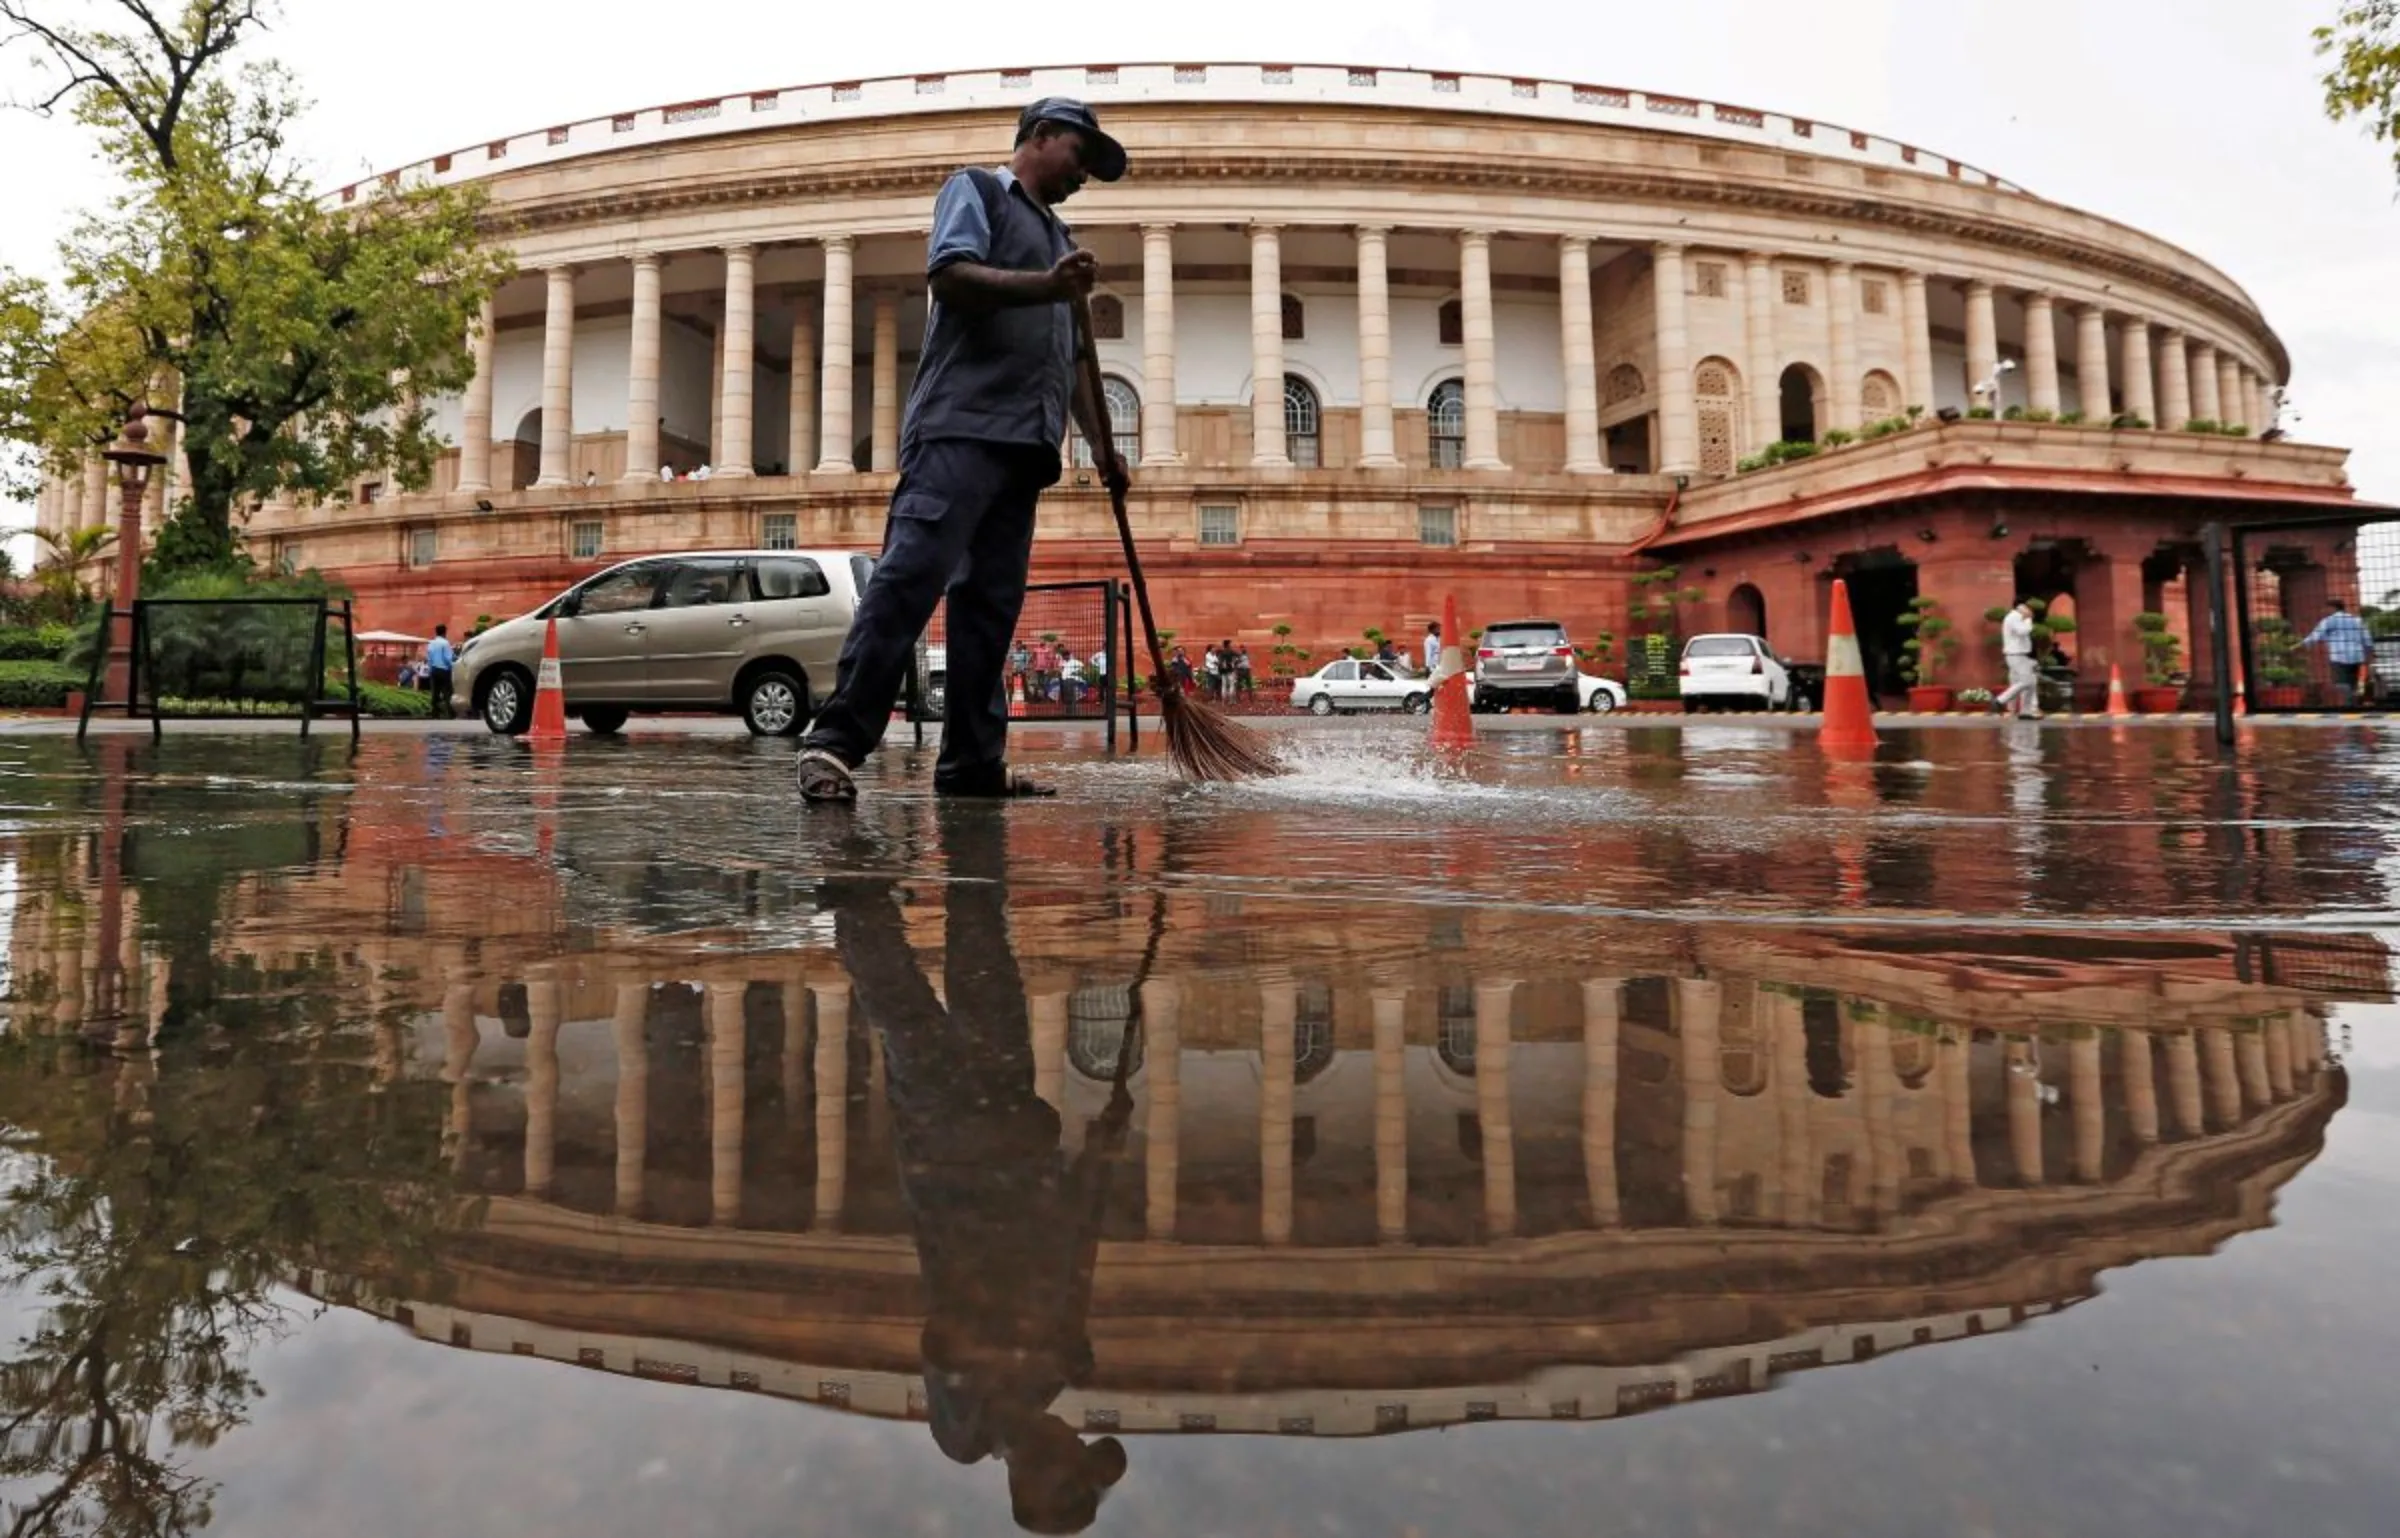 Indian parliament building is reflected in a puddle after the rain as a man sweeps the water in New Delhi, India July 20, 2018. REUTERS/Adnan Abidi